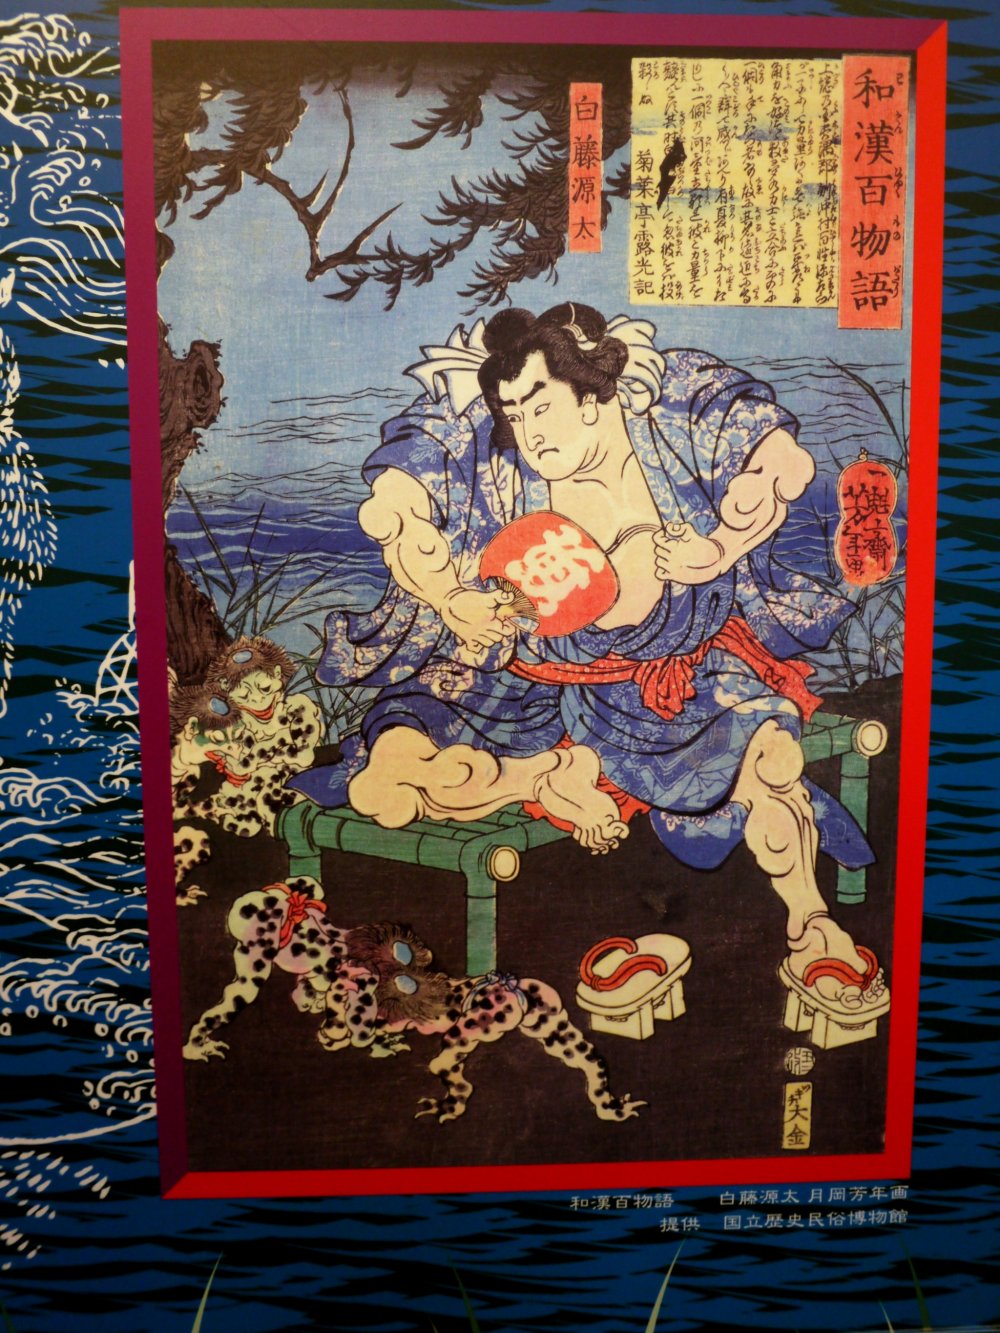 Artwork of a samurai surrounded by playful kappa